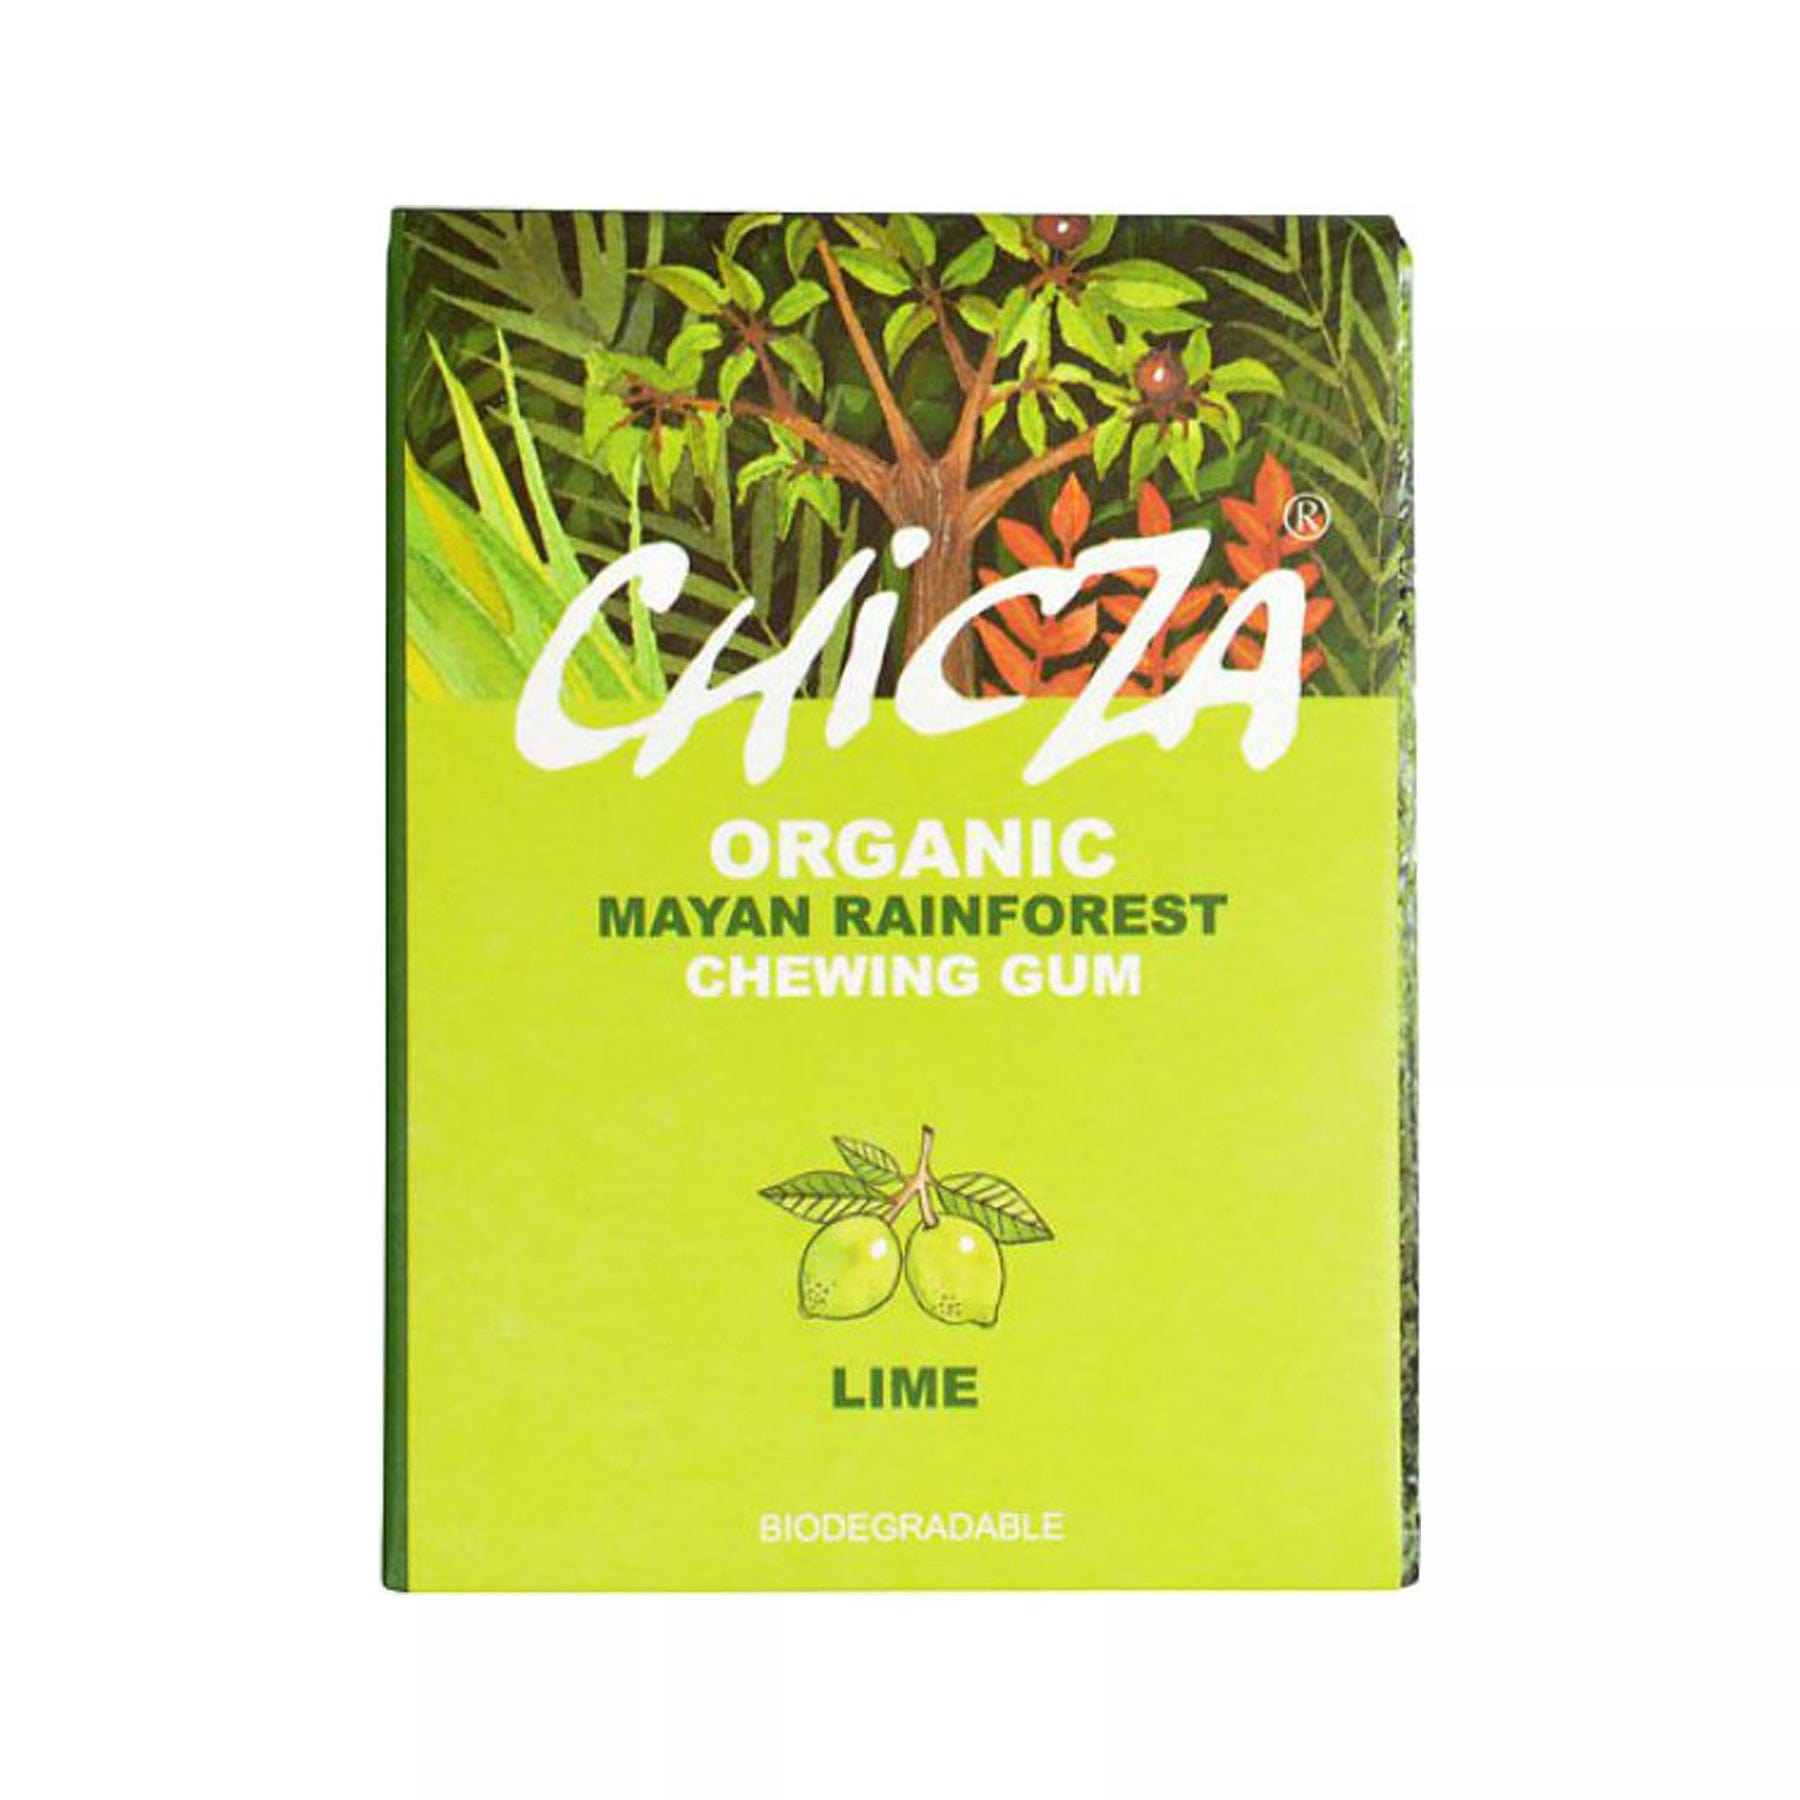 Chicza organic Mayan rainforest lime flavored biodegradable chewing gum package.